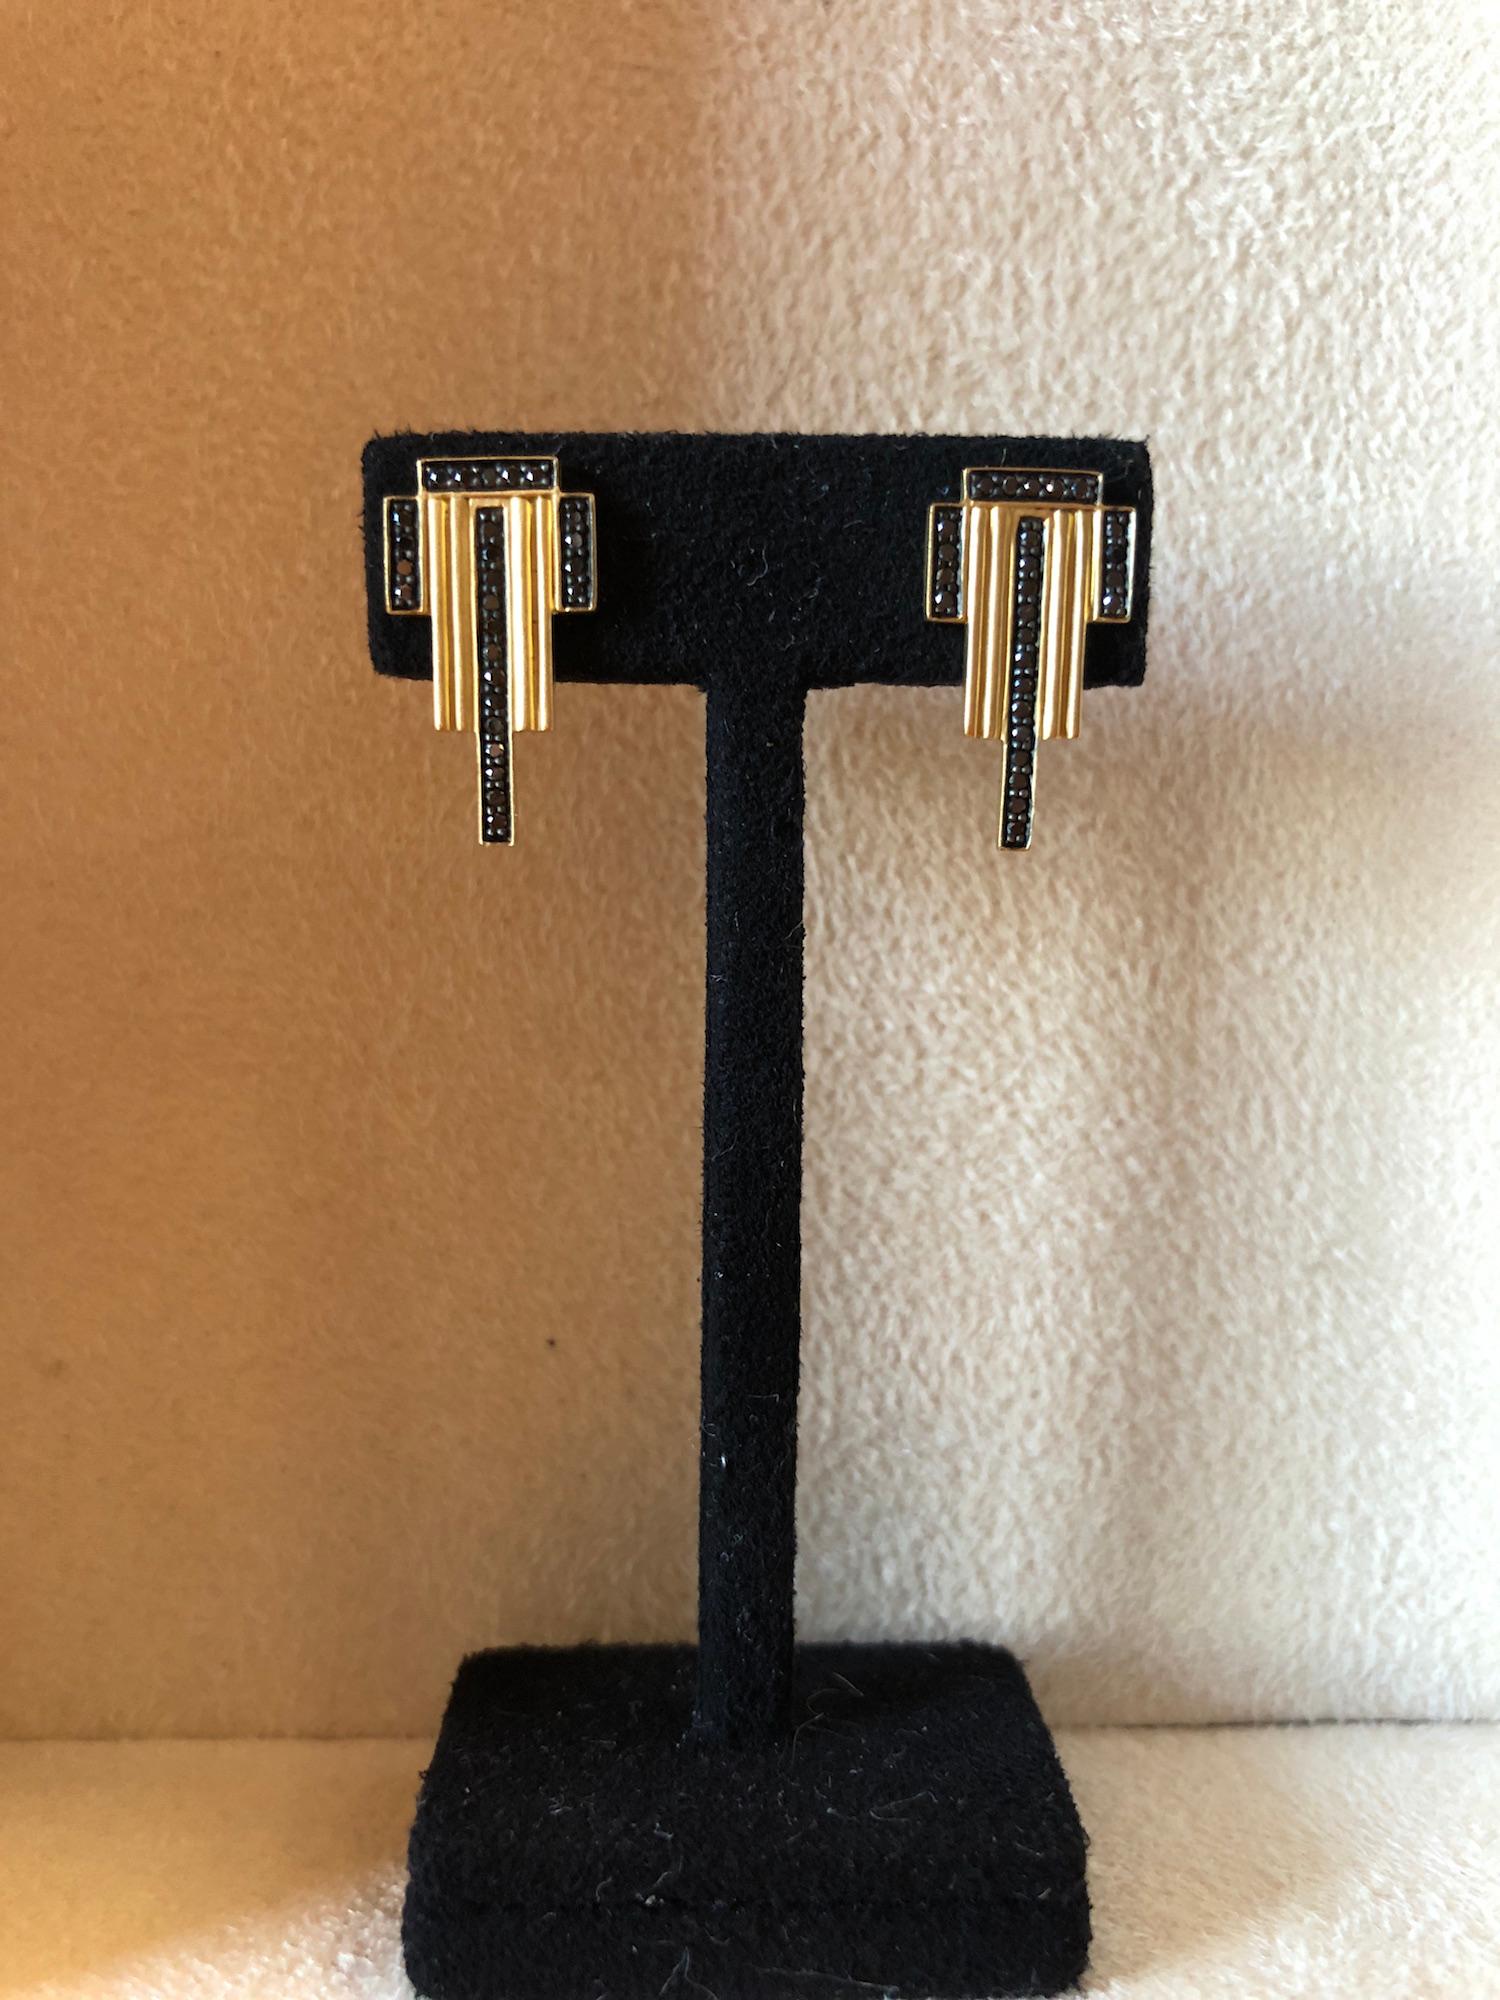 The Empire earrings, by Doryn Wallach, feature 0.22 carats of black diamonds set in a motif that recalls the Art Deco architecture of New York City.  Set in finely ribbed 18K yellow gold with satin finish, these earrings are a modern Art Deco